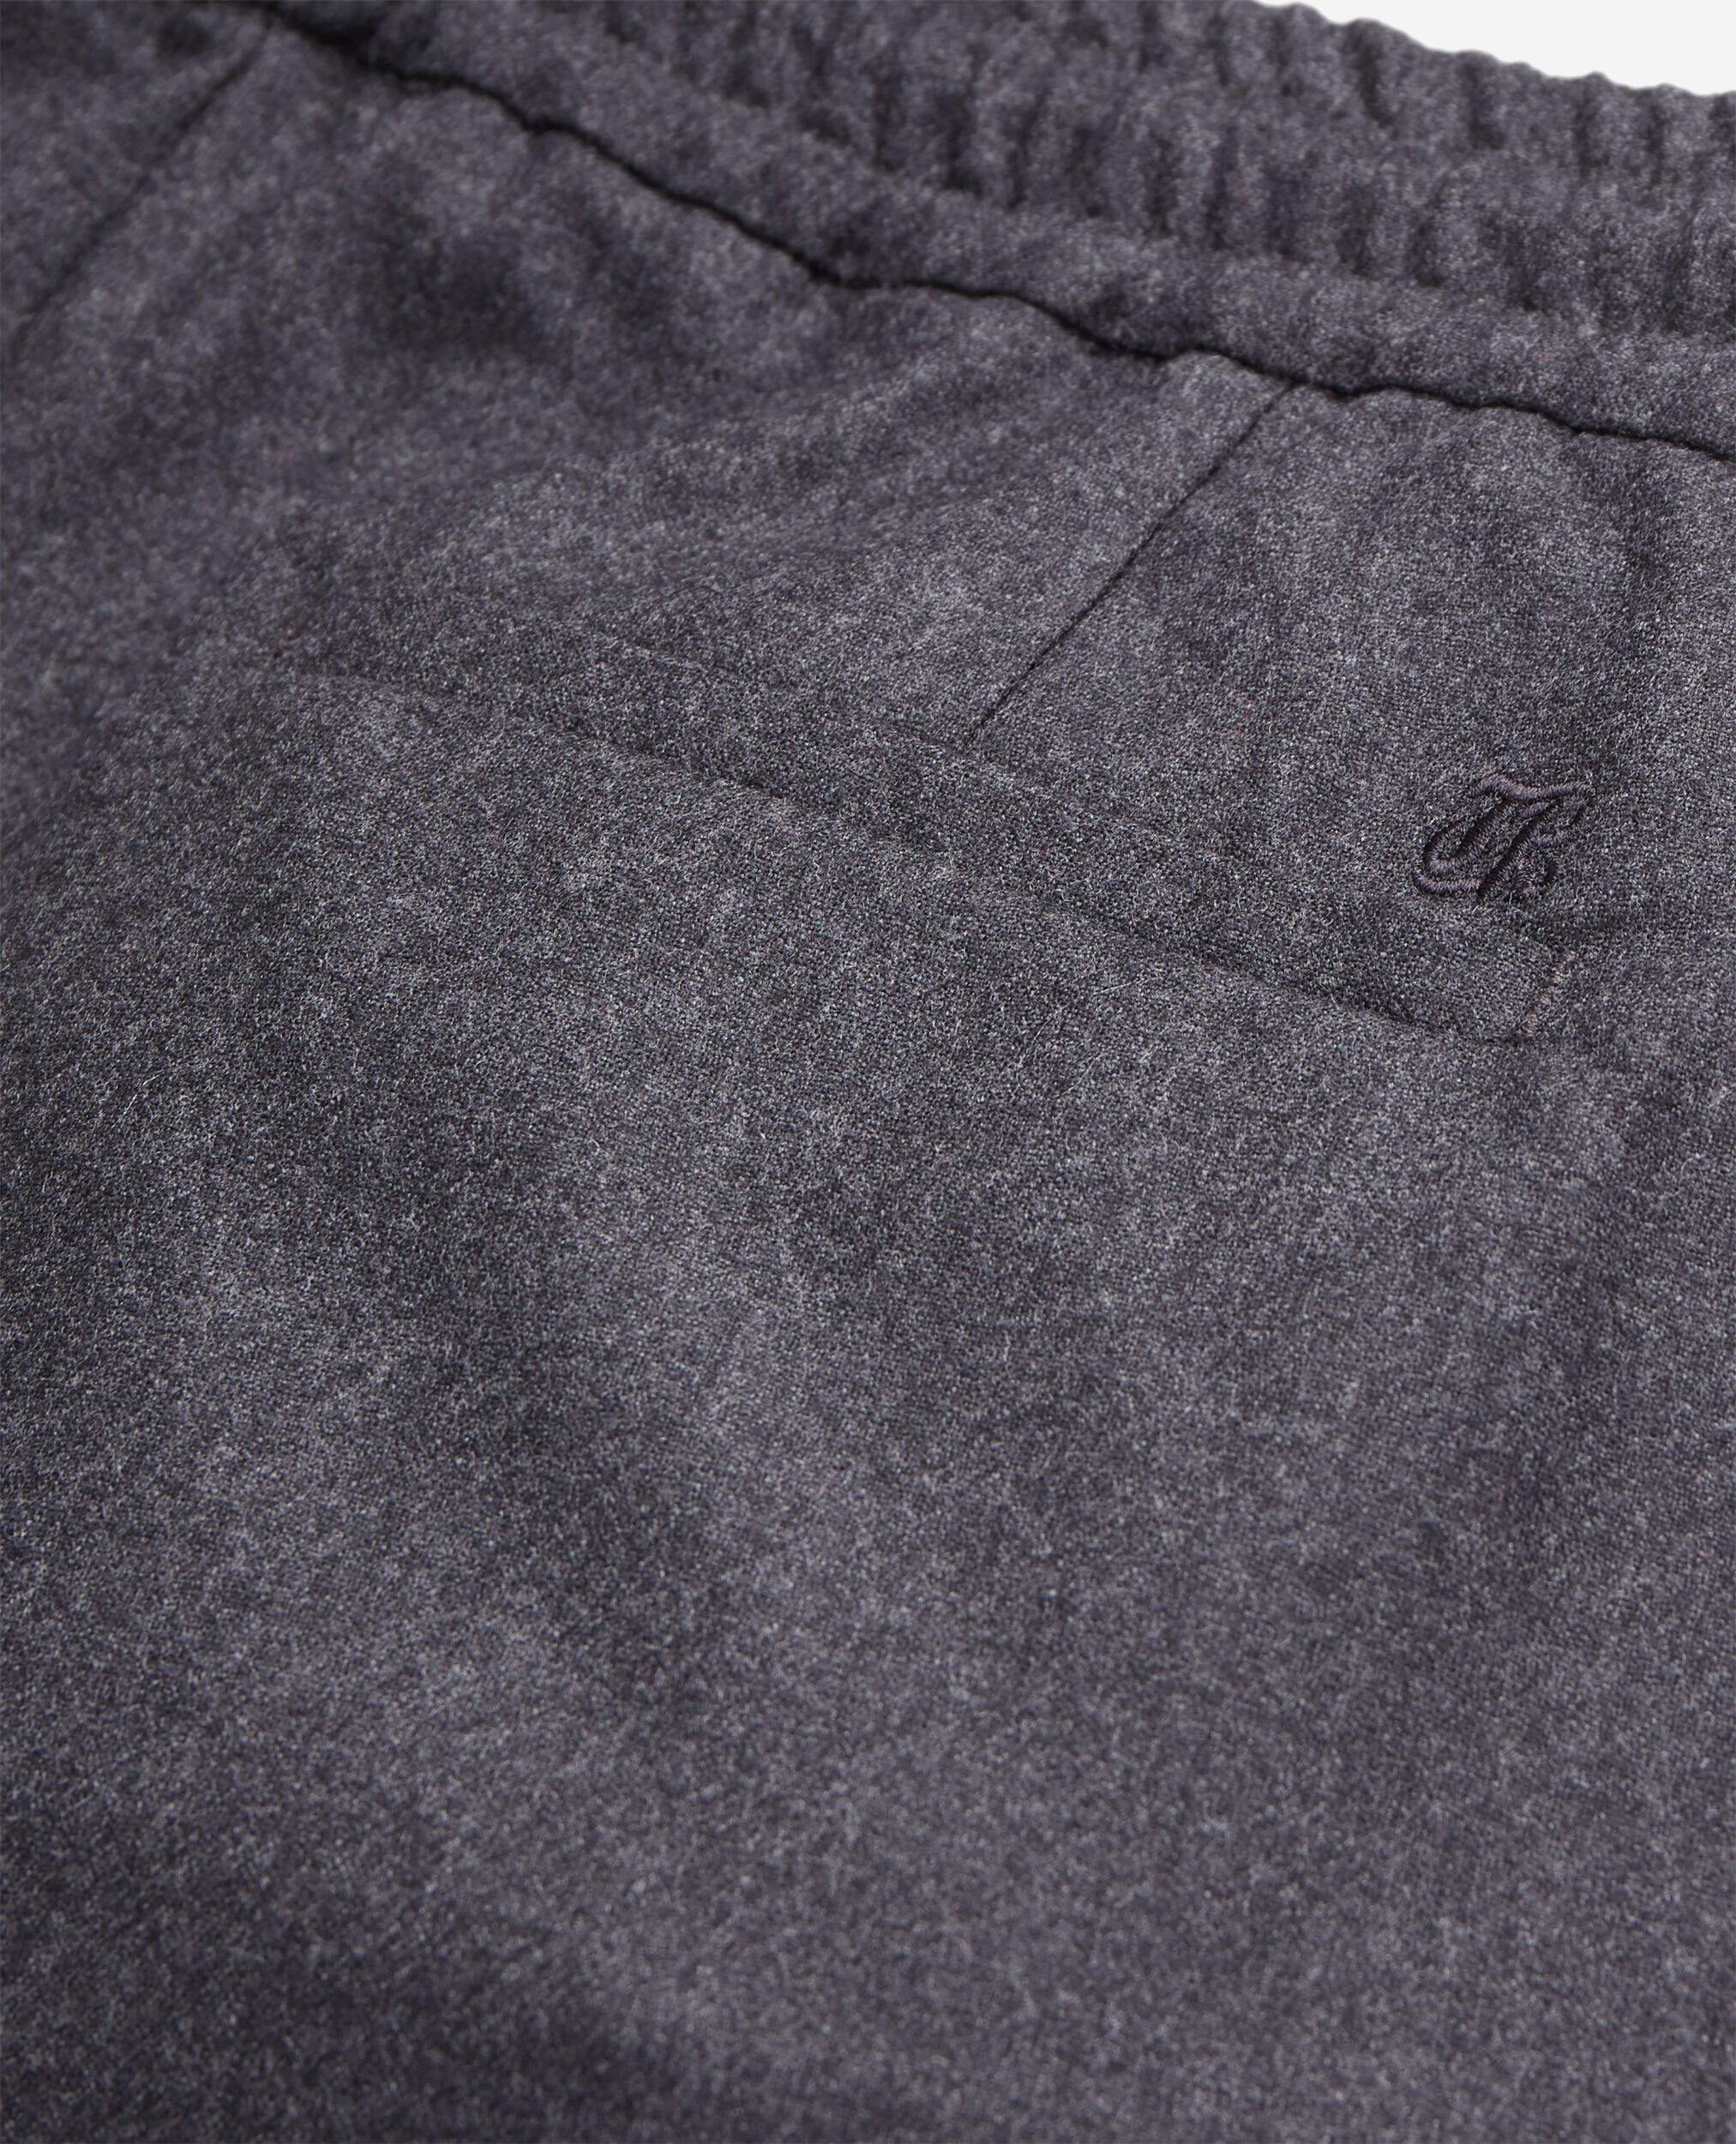 Grey flannel trousers, DARK GREY, hi-res image number null